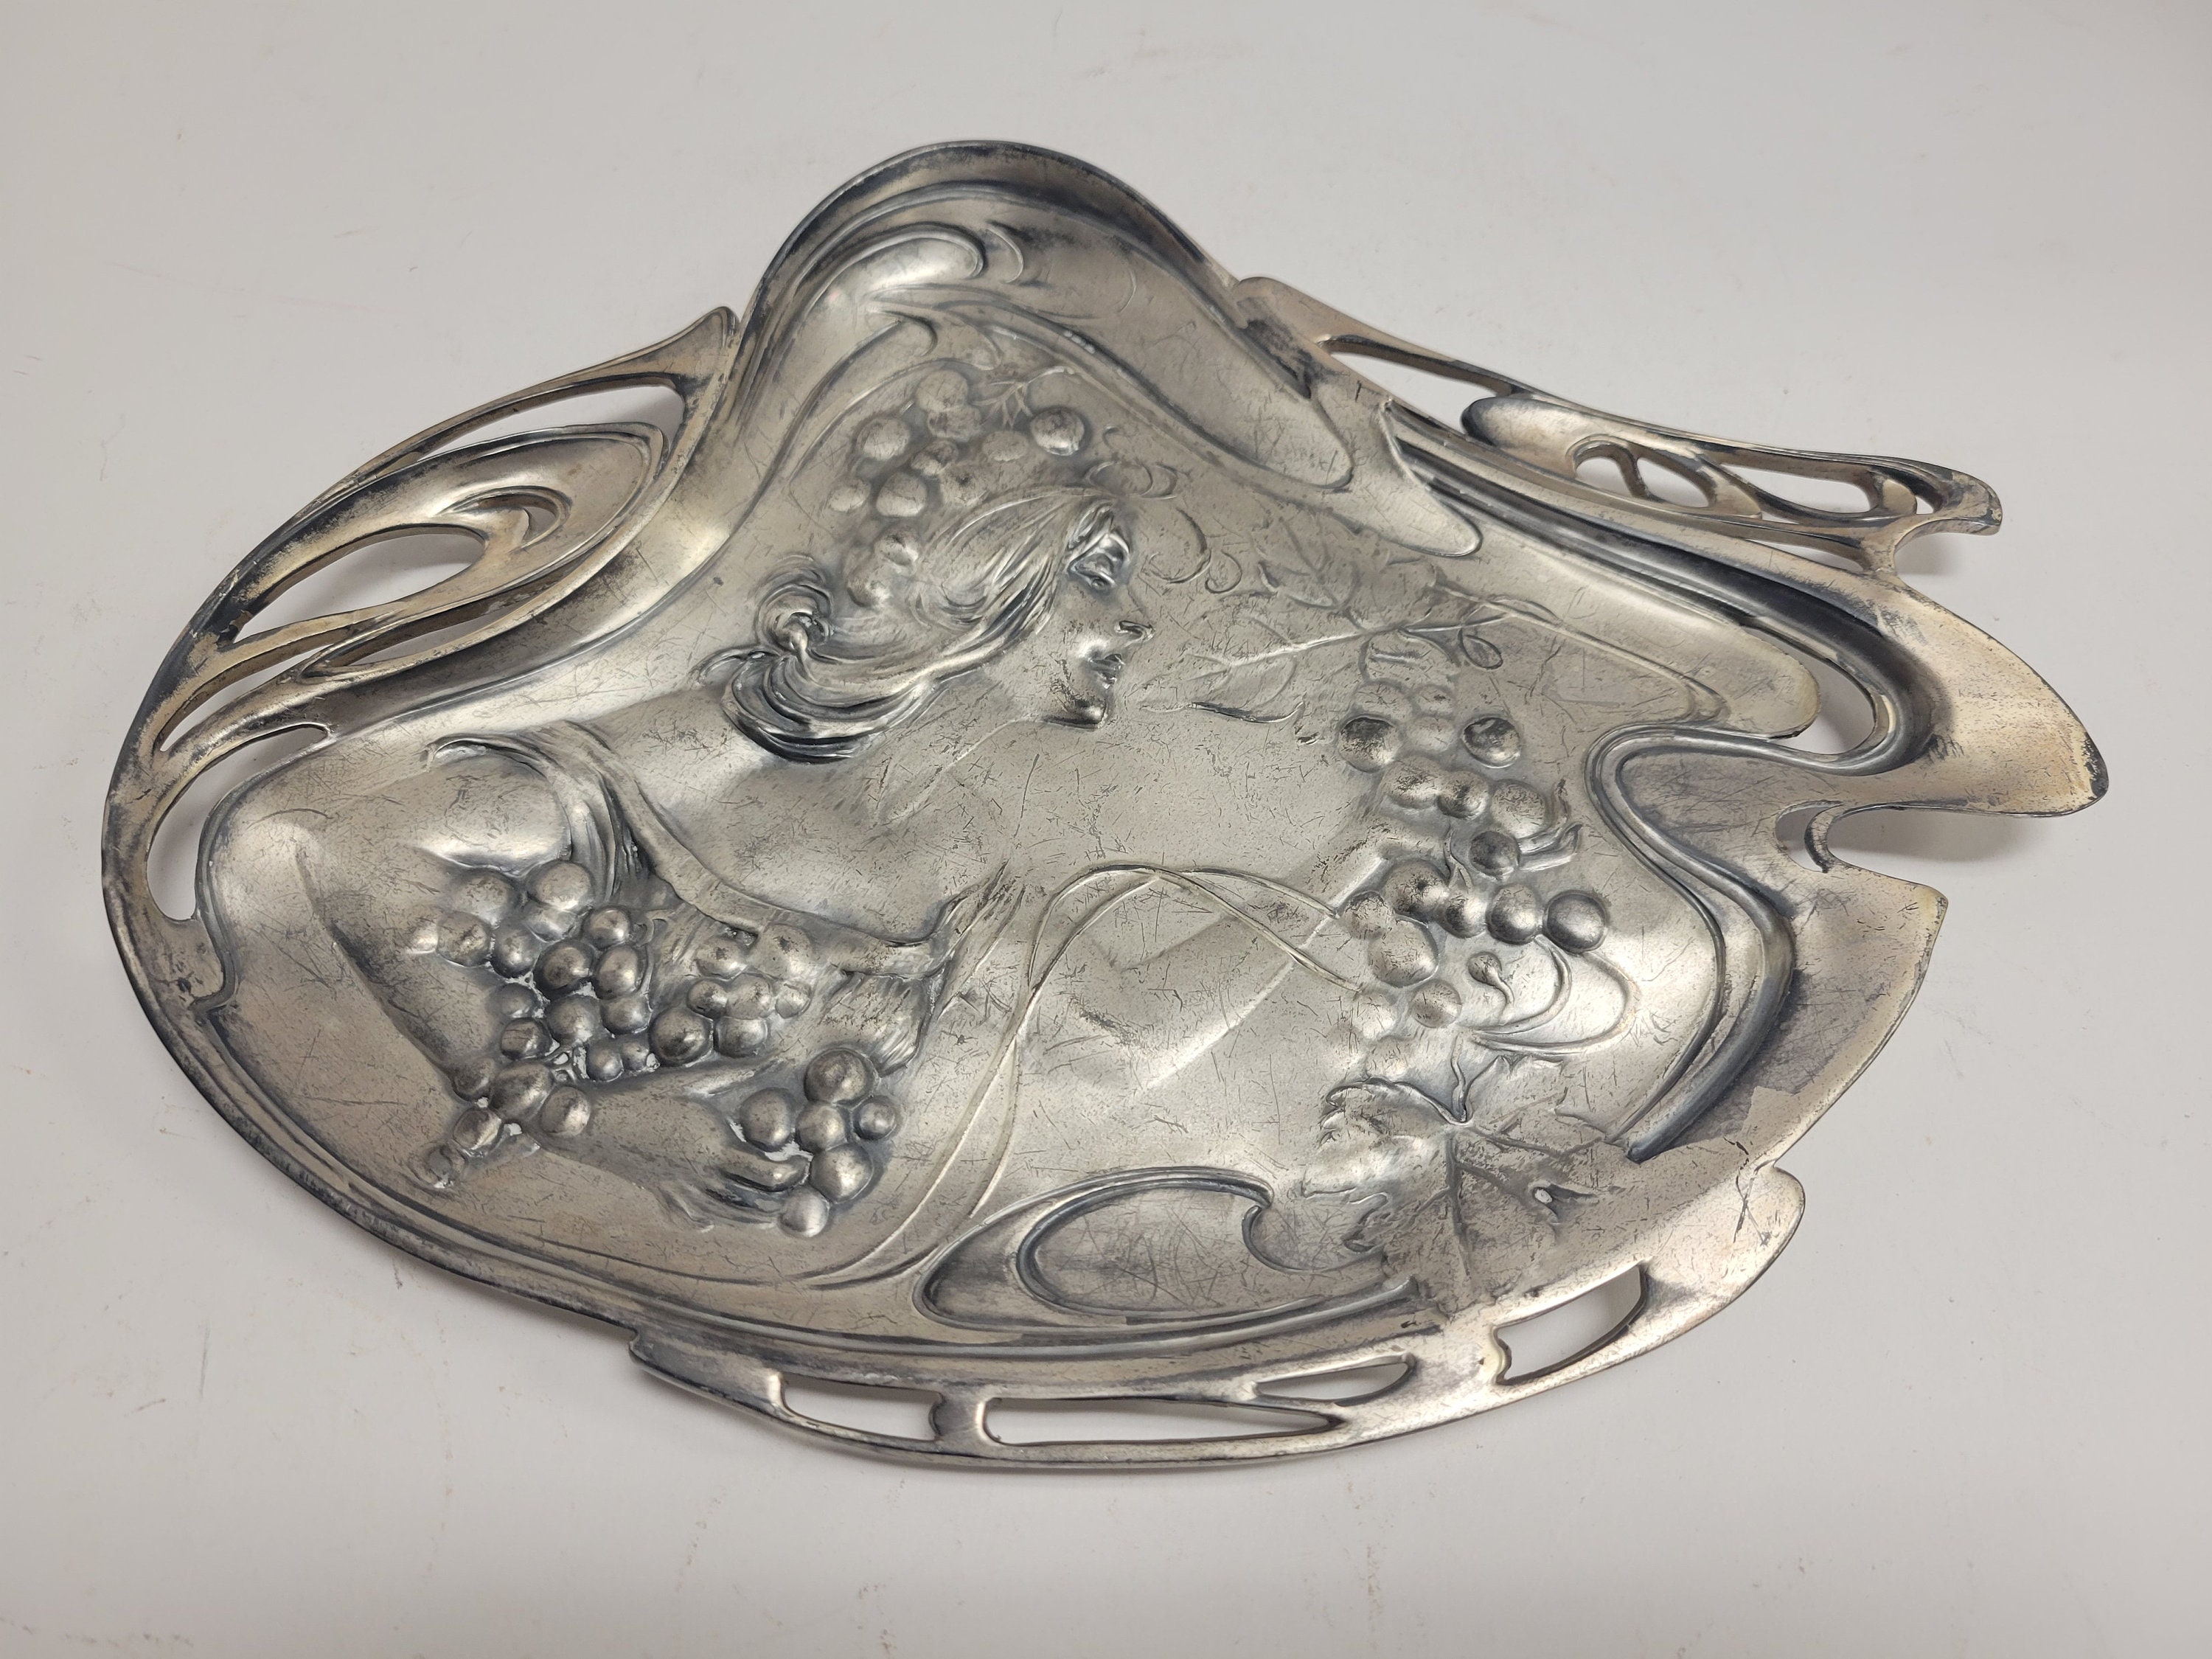 NOUVEAU Over Etsy Silver 1900. Quadruple Plate Comp. - Plating Tray by American RARE, Antique ART 608 Circa Pewter.